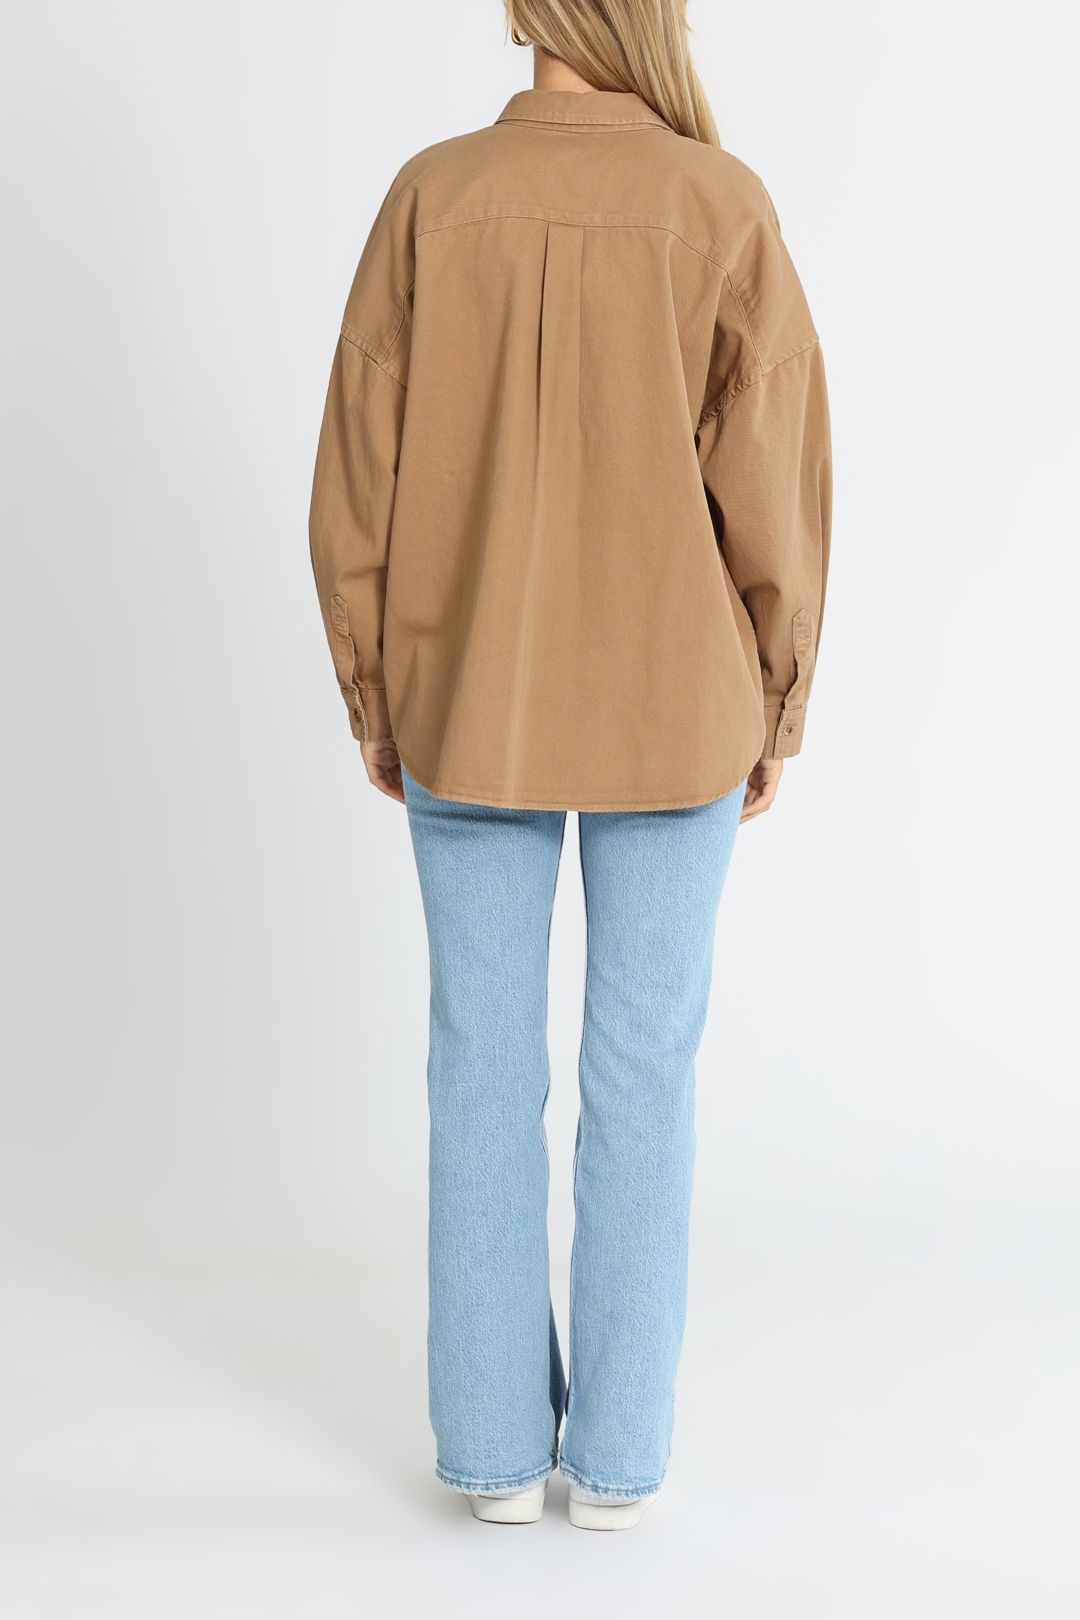 LMND Diaz Long Sleeve Shirt Toffee Relaxed Fit